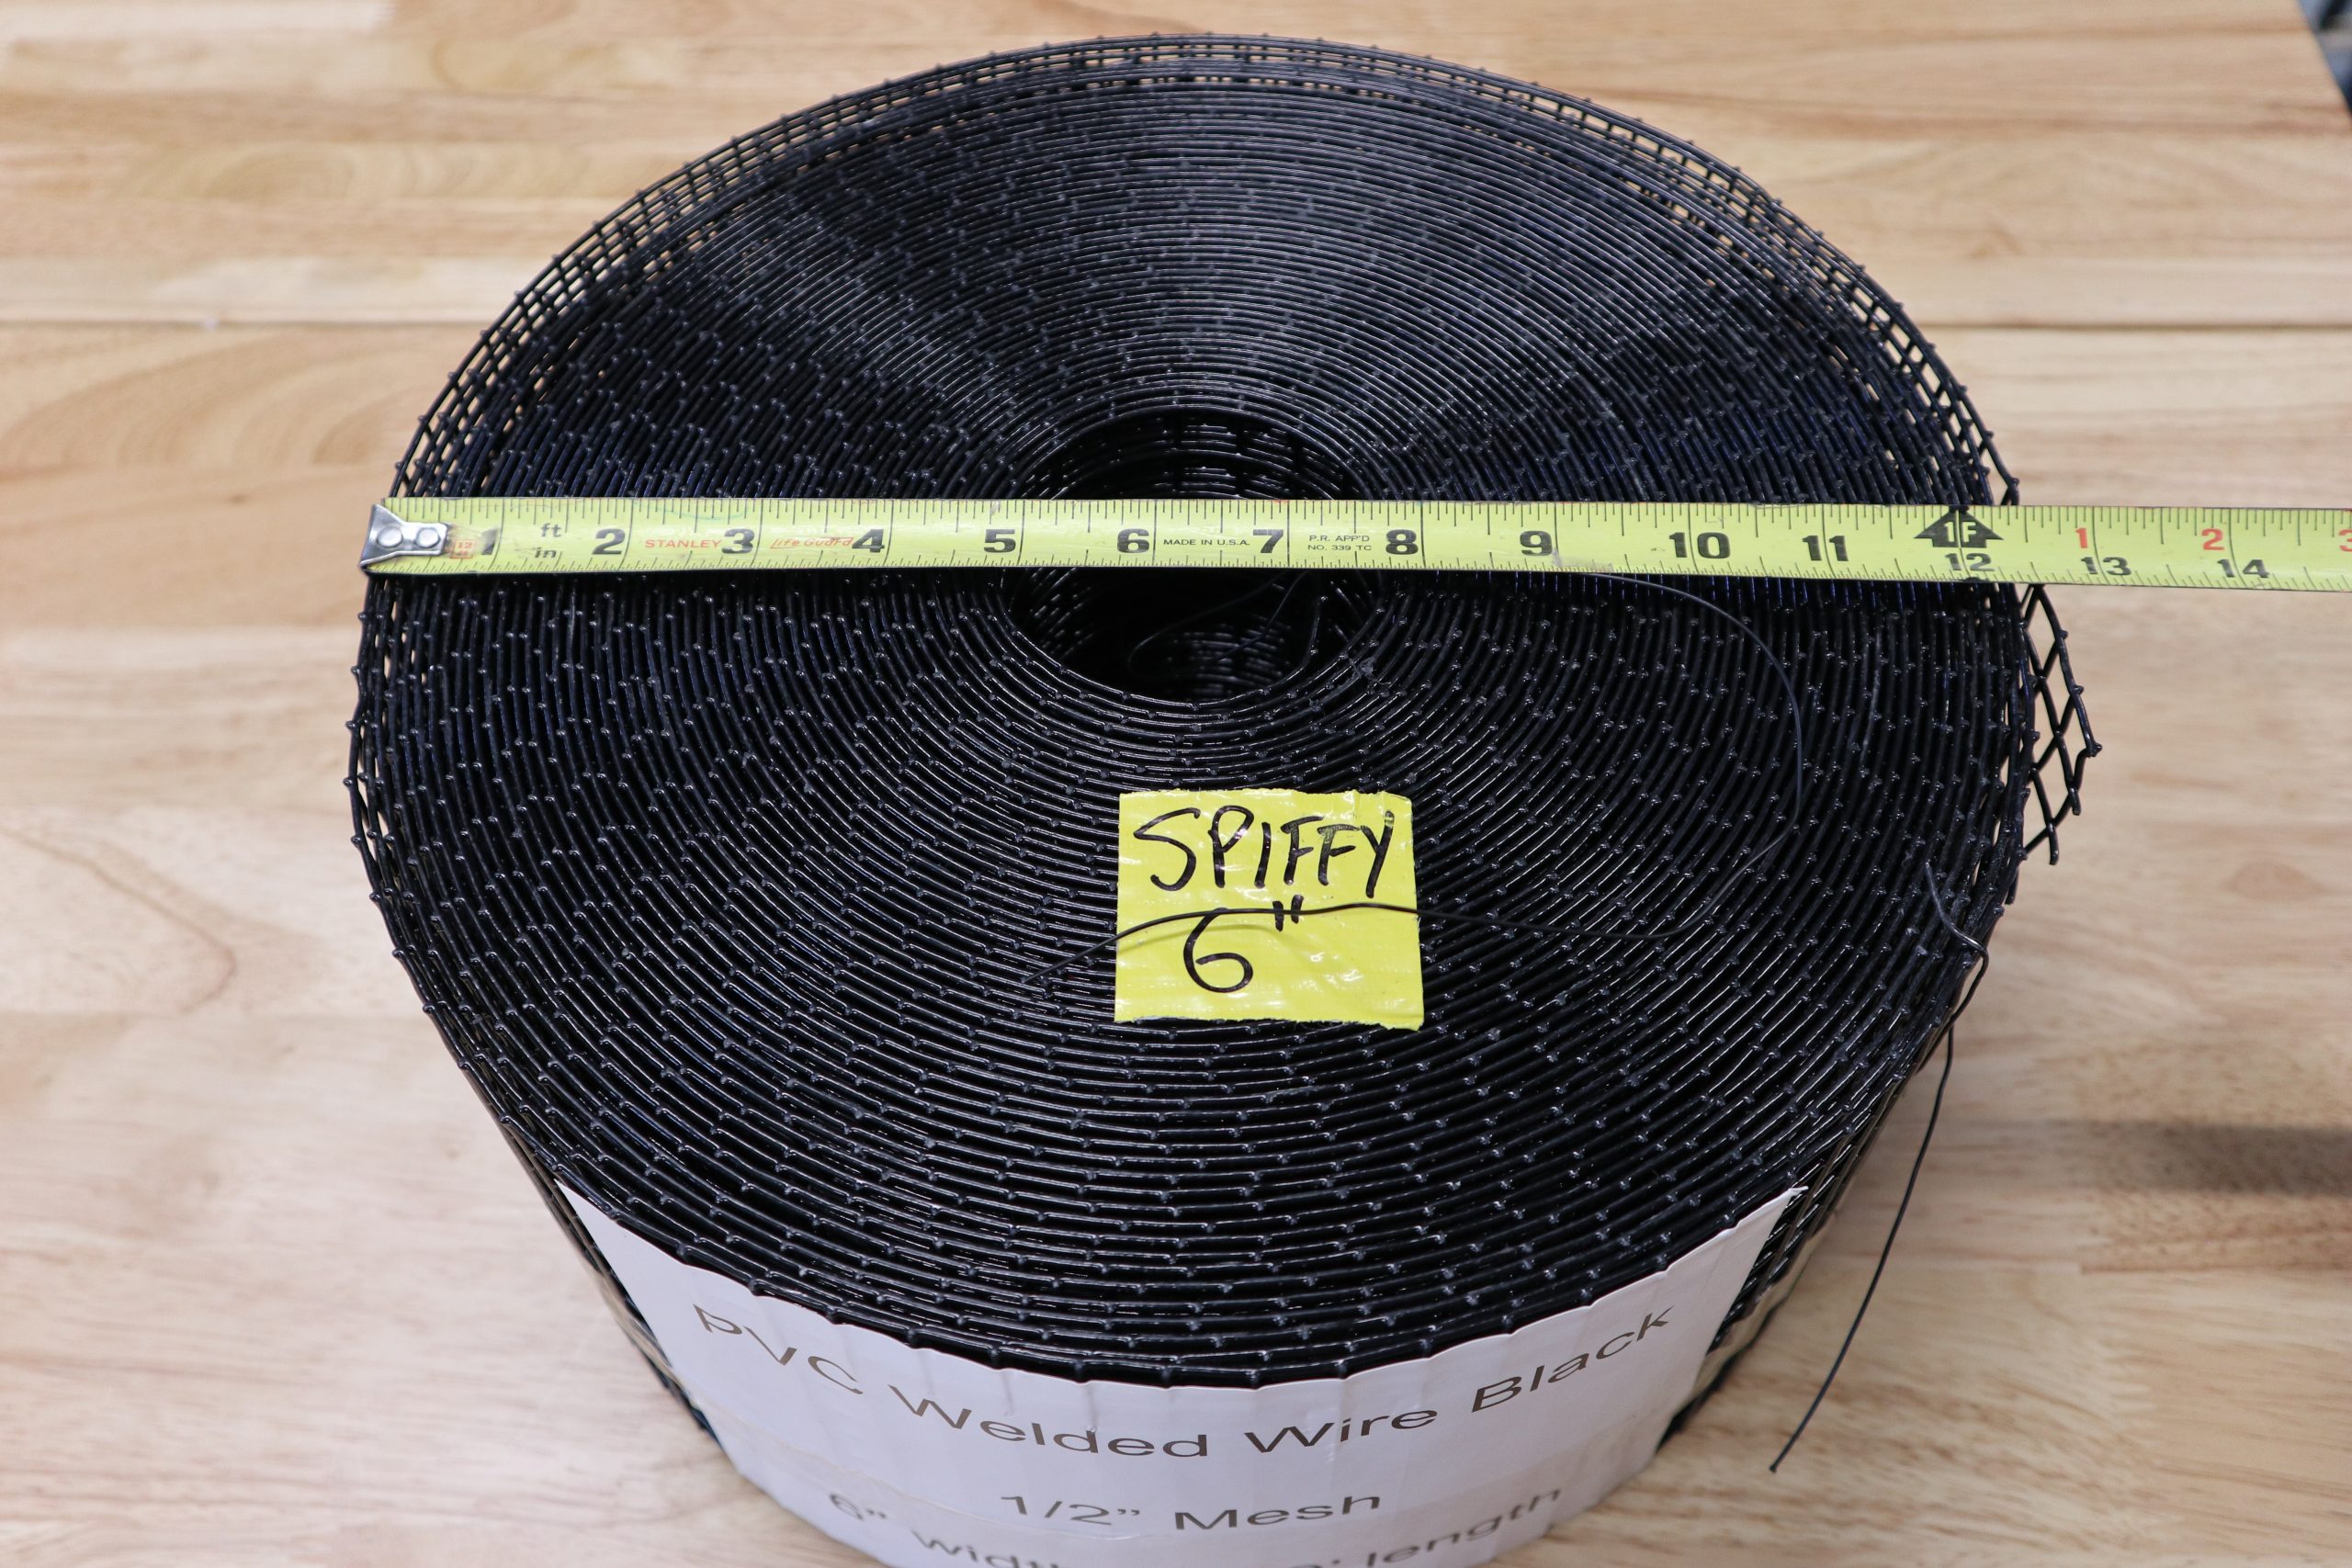 spiffy mesh spool with tape measure showing diameter